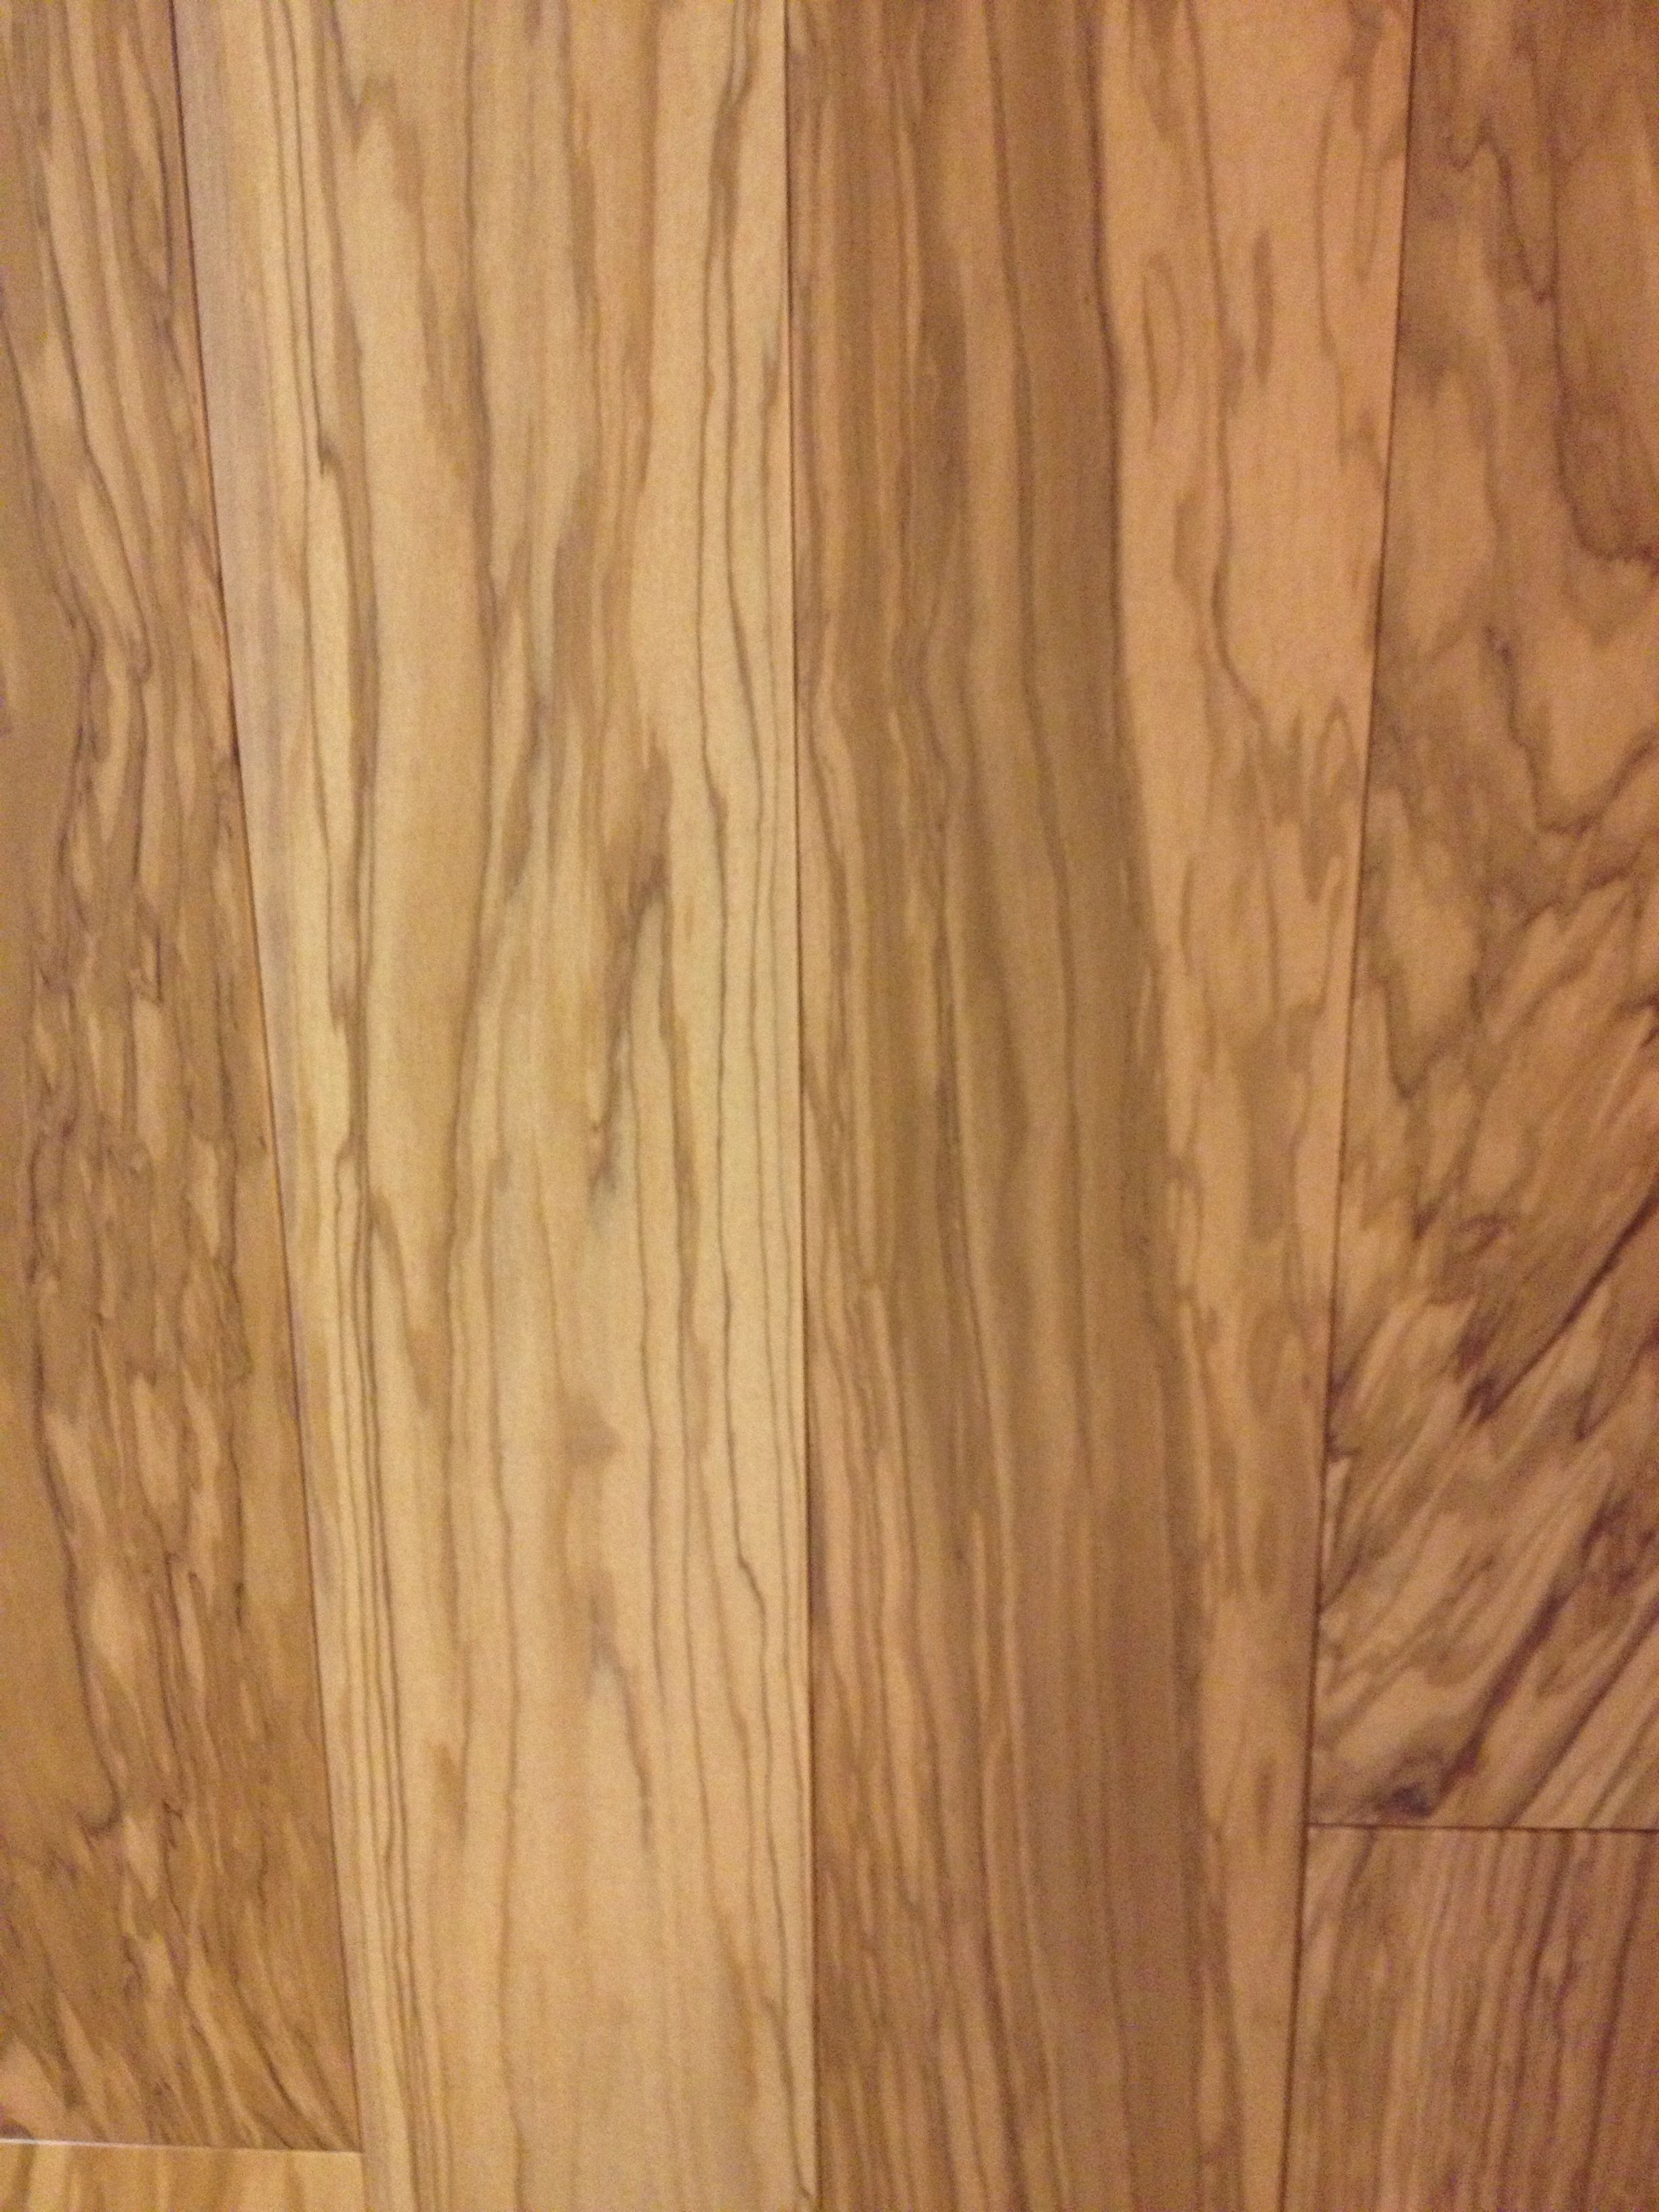 21 Wonderful Hardwood Floor Refinishing Nj Costs 2024 free download hardwood floor refinishing nj costs of tuscany olive wood floor there is nothing quite like olive wood for with regard to tuscany olive wood floor there is nothing quite like olive wood for 